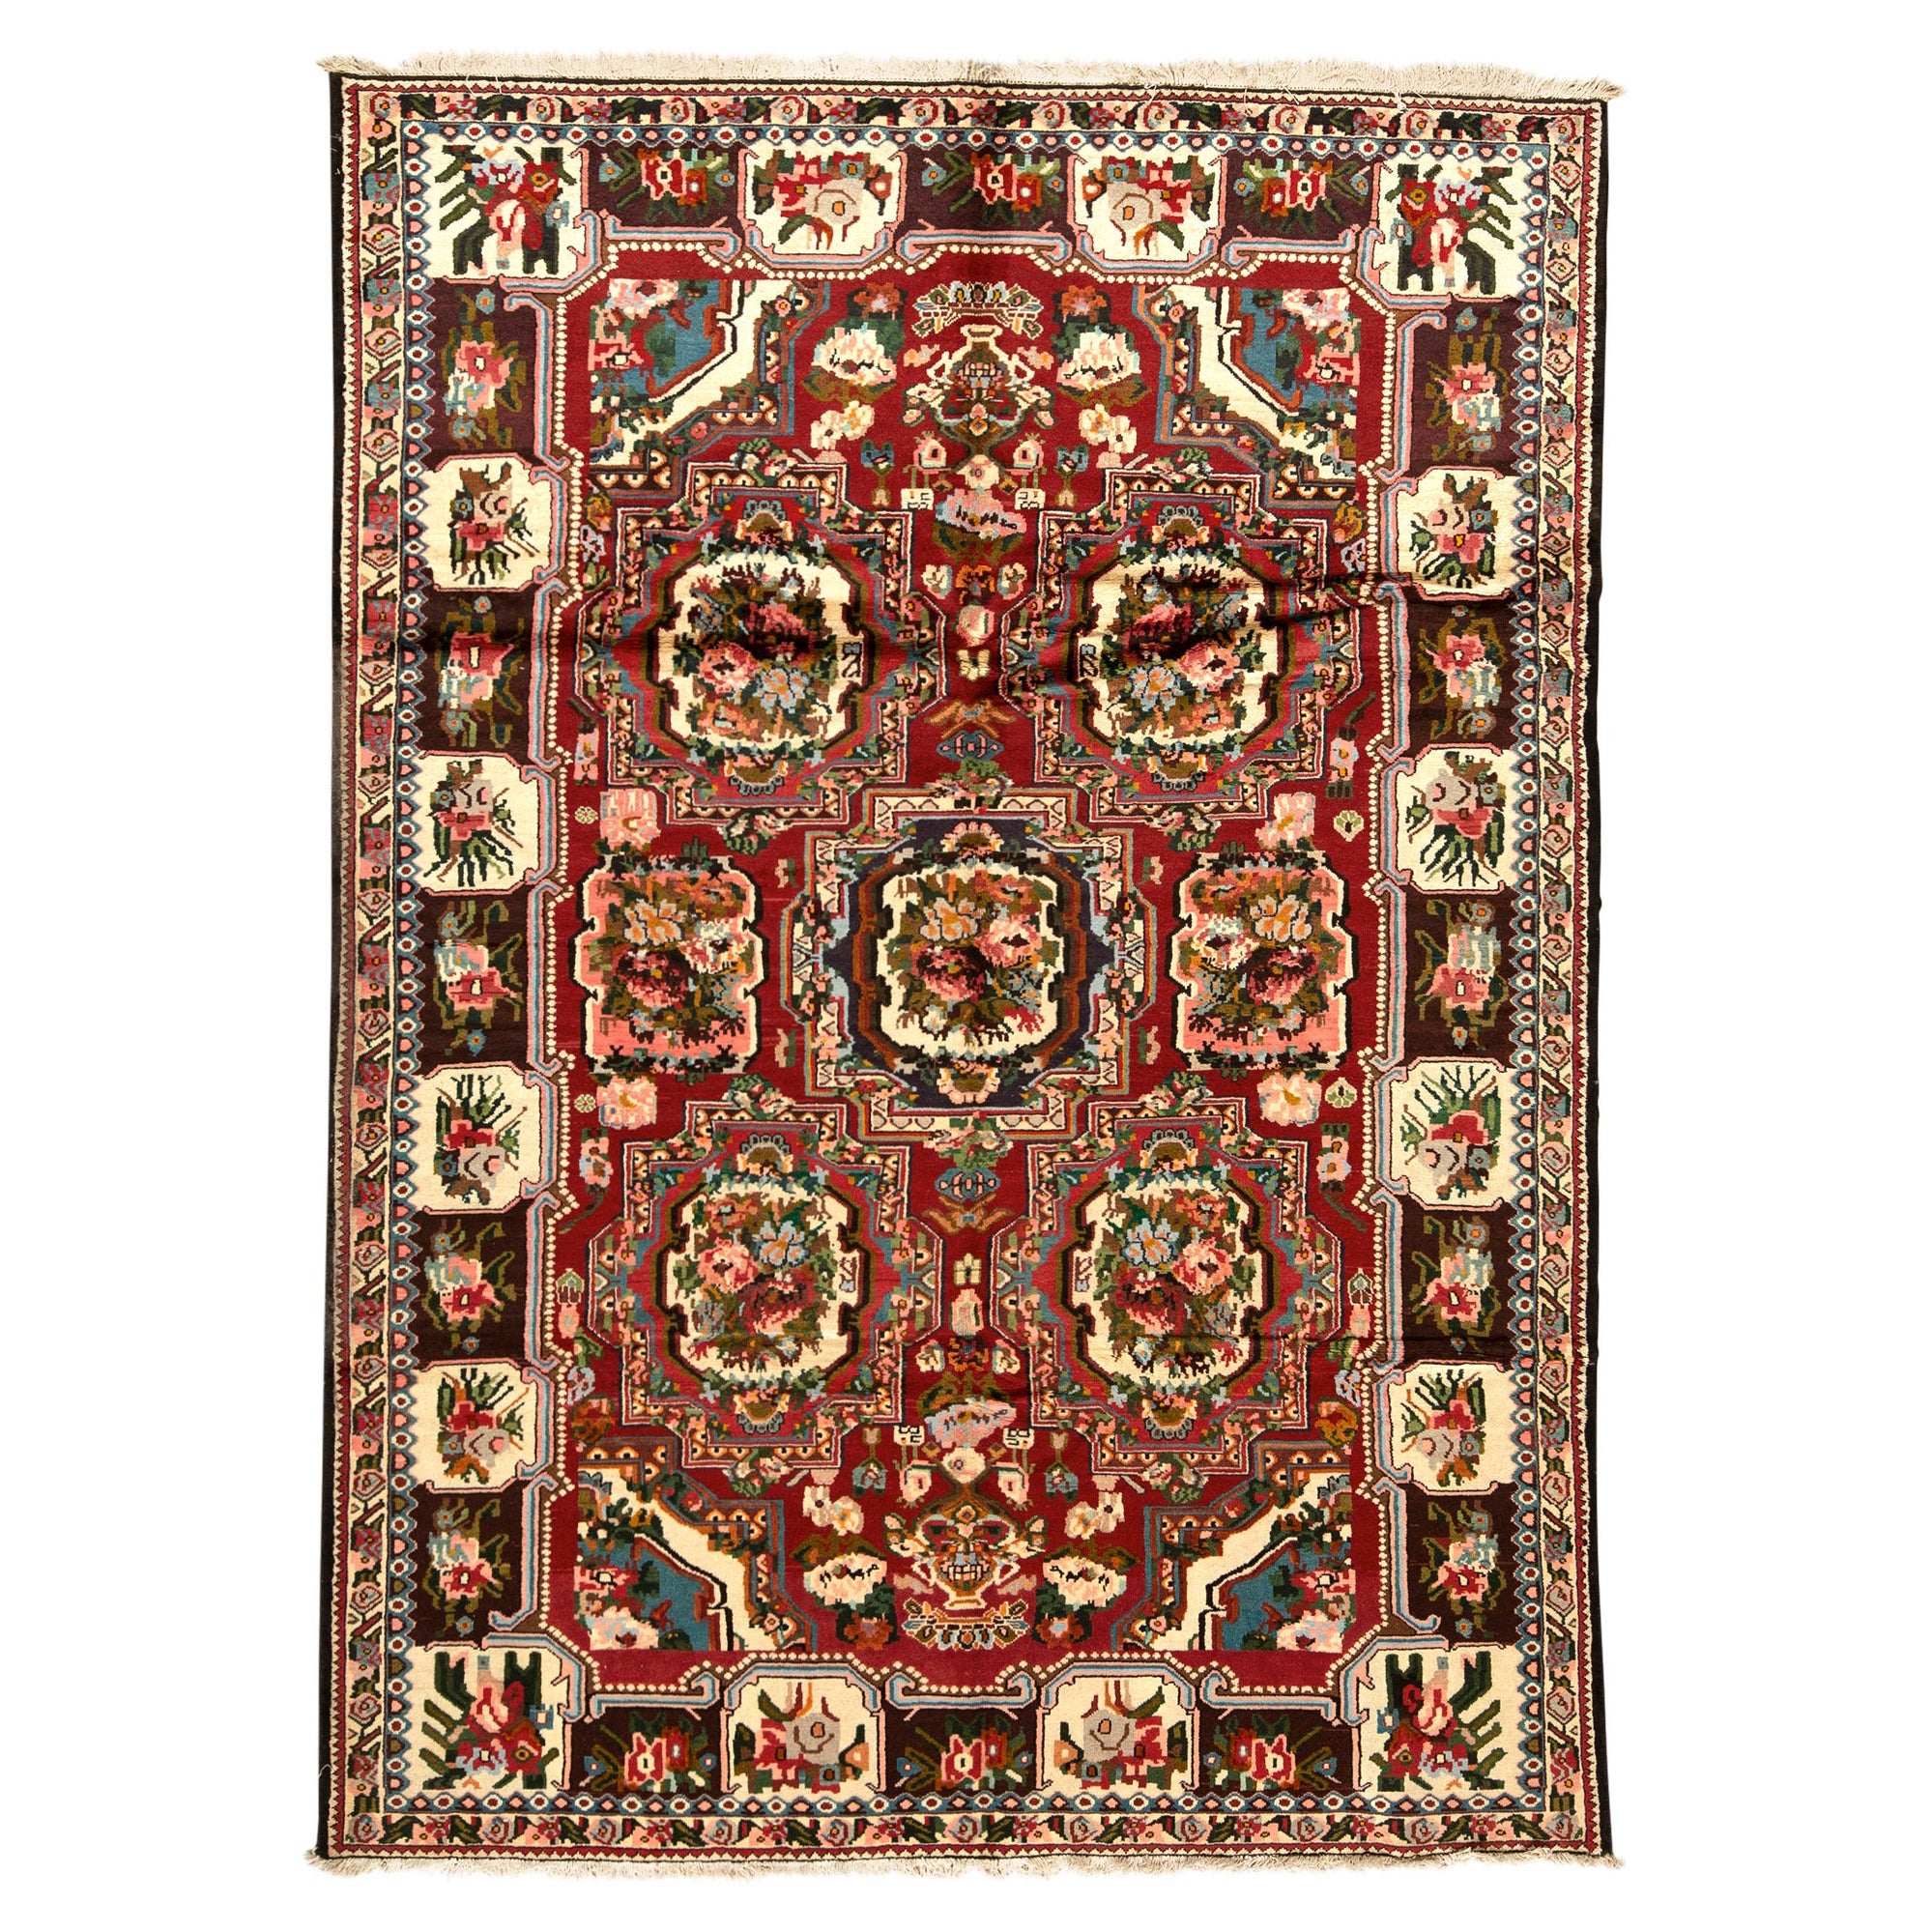 Antique Persian Fine Traditional Handwoven Luxury Wool Red Rug